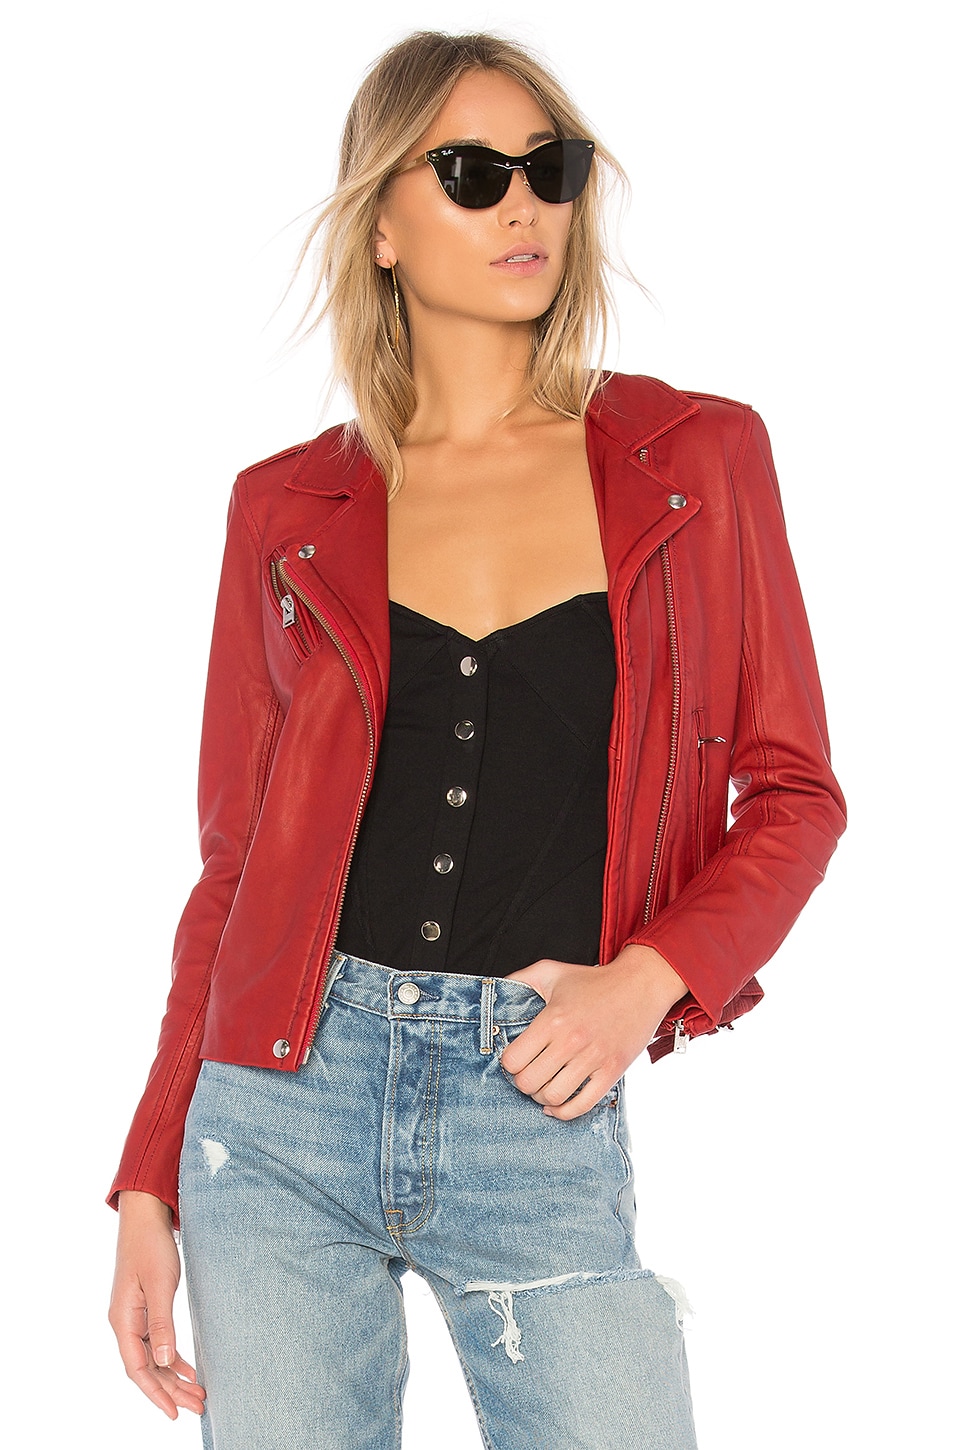 IRO Han Leather Jacket in Ruby | REVOLVE